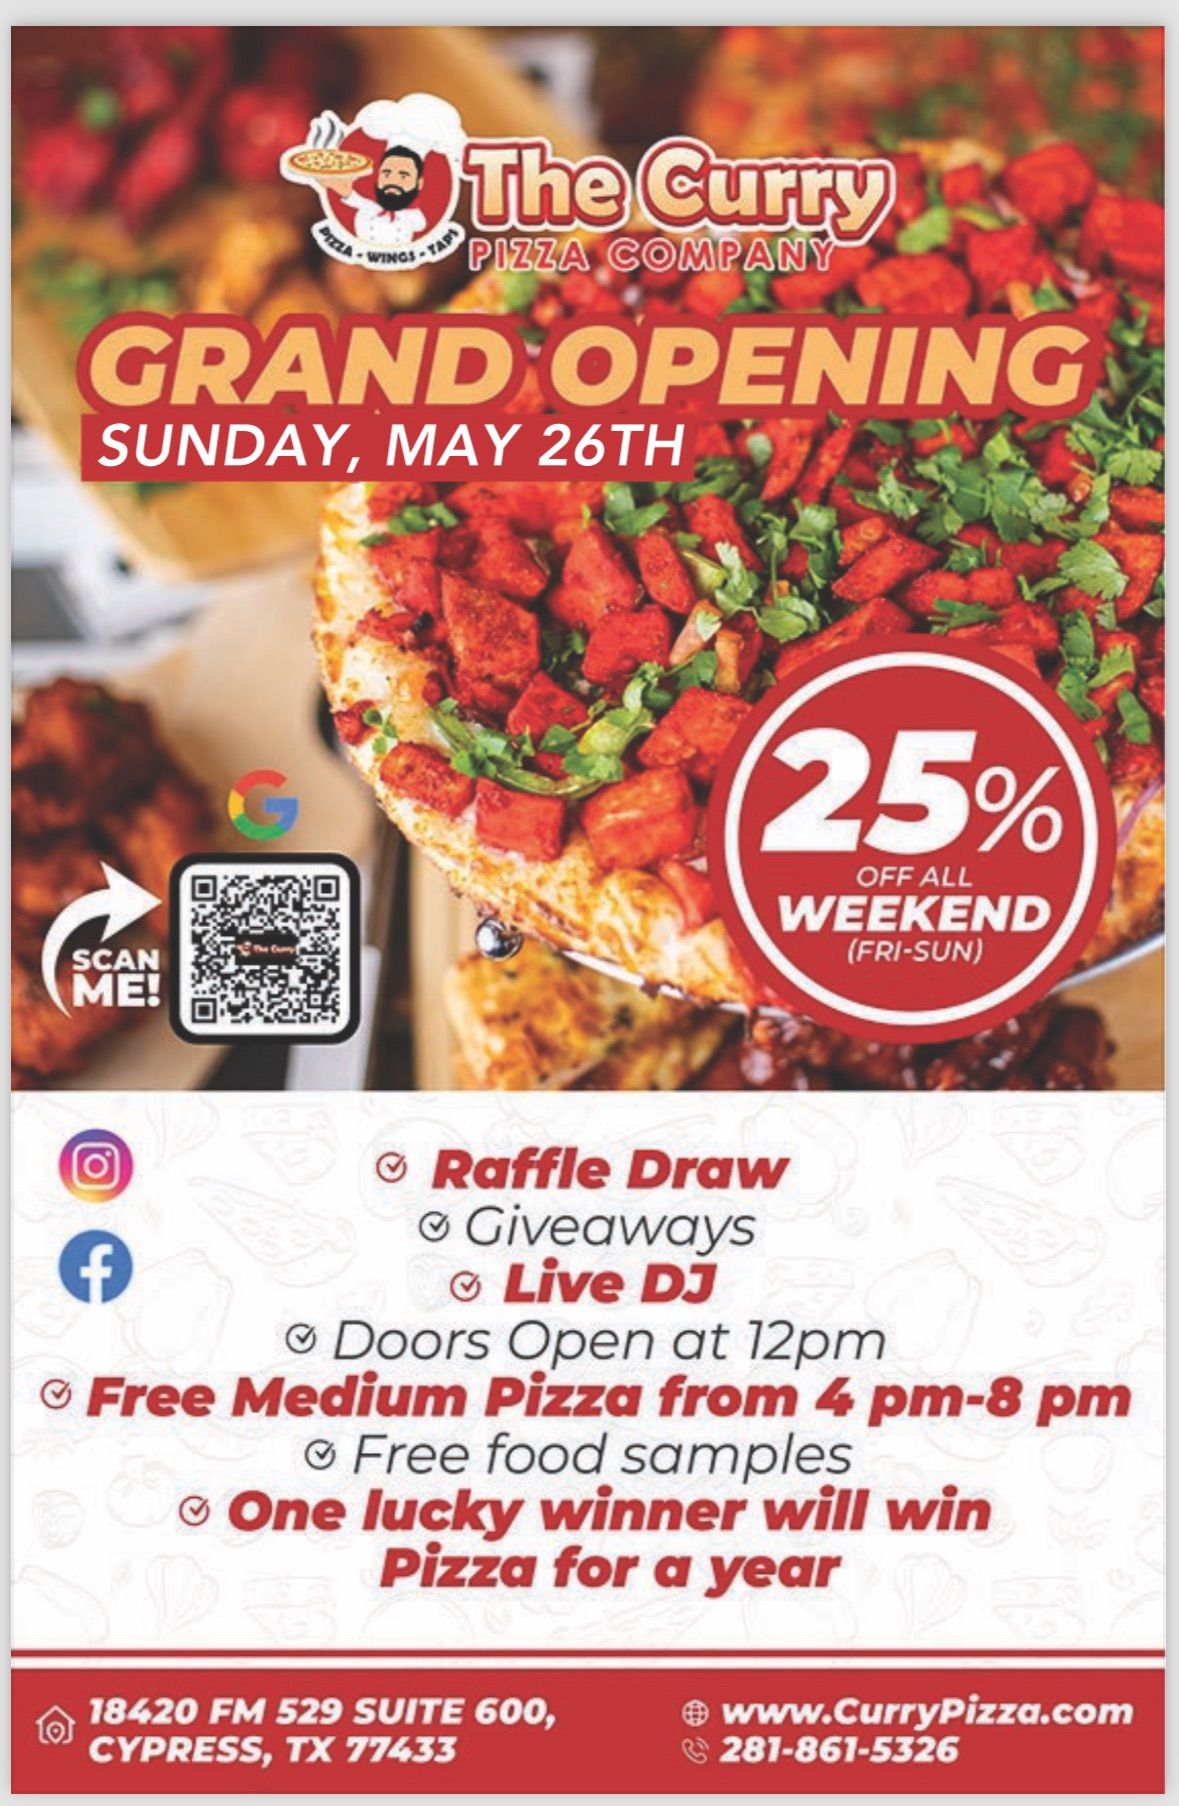 Grand Opening Day - The Curry Pizza Company